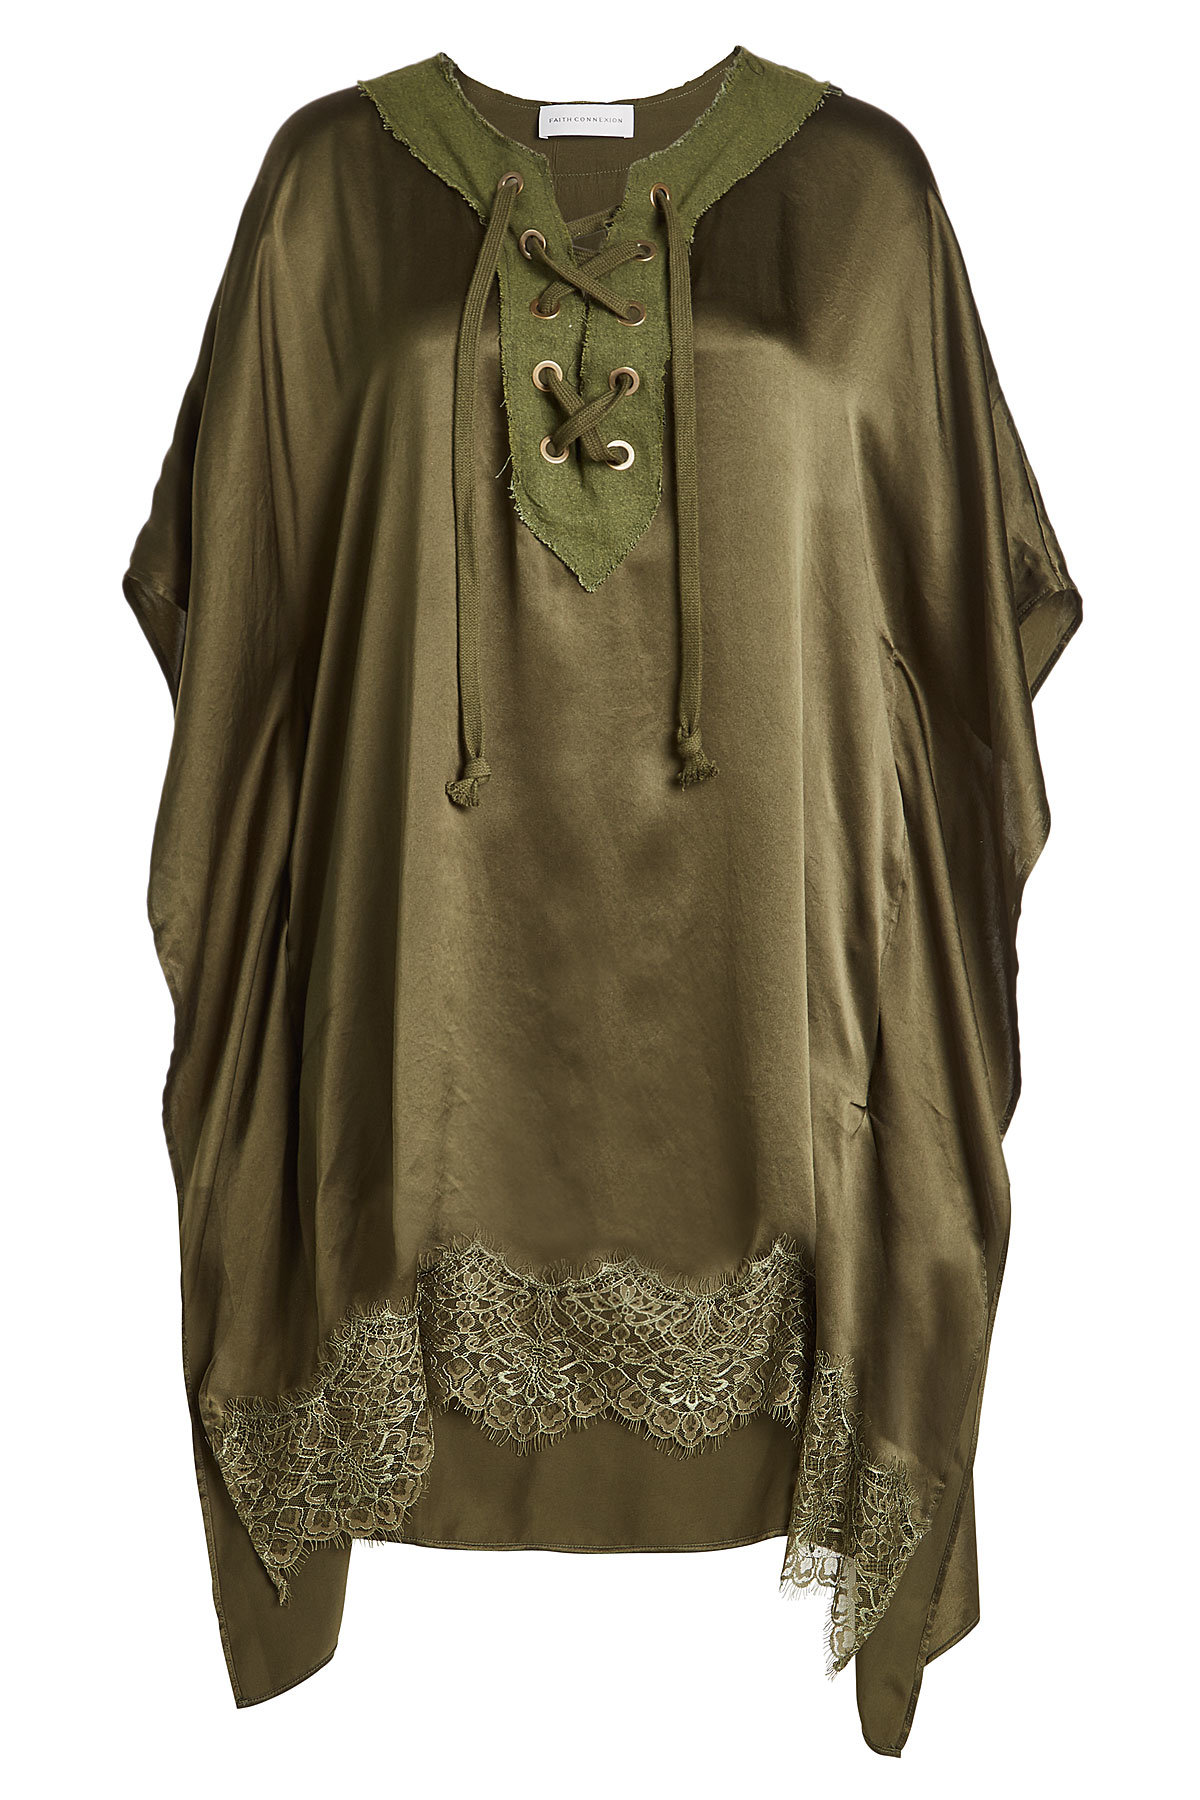 Faith Connexion - Silk Poncho with Lace